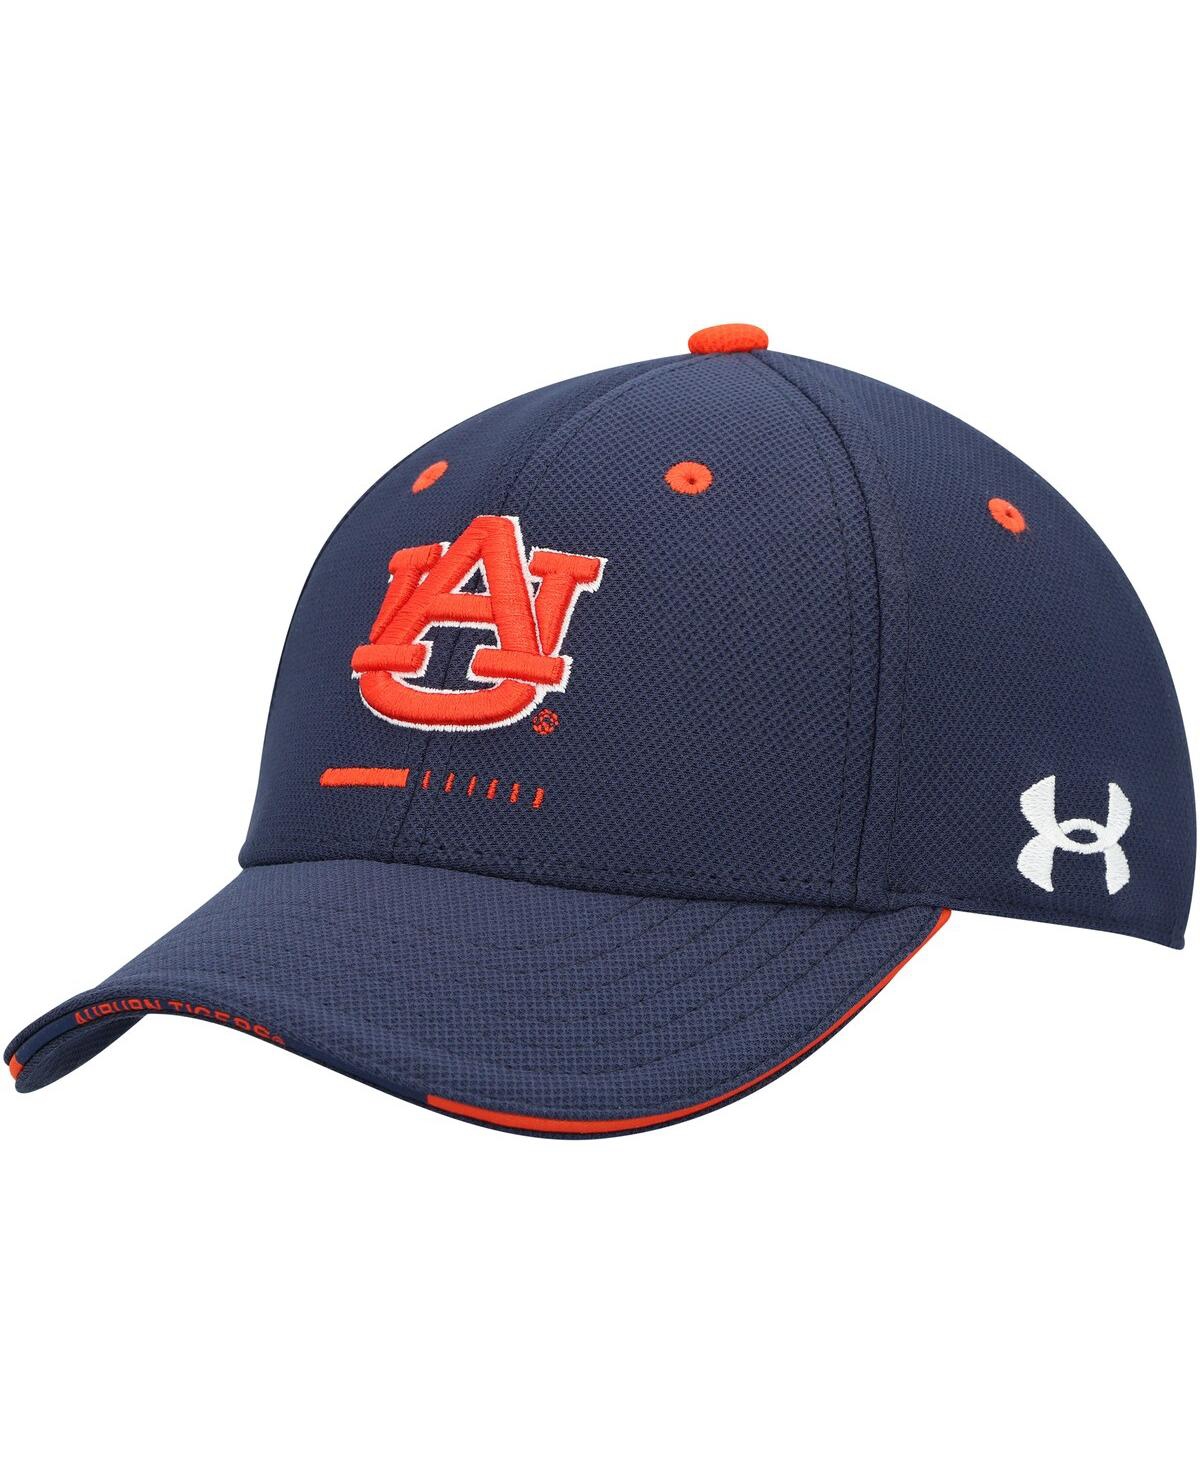 Under Armour Kids' Big Boys And Girls  Navy Auburn Tigers Blitzing Accent Performance Adjustable Hat